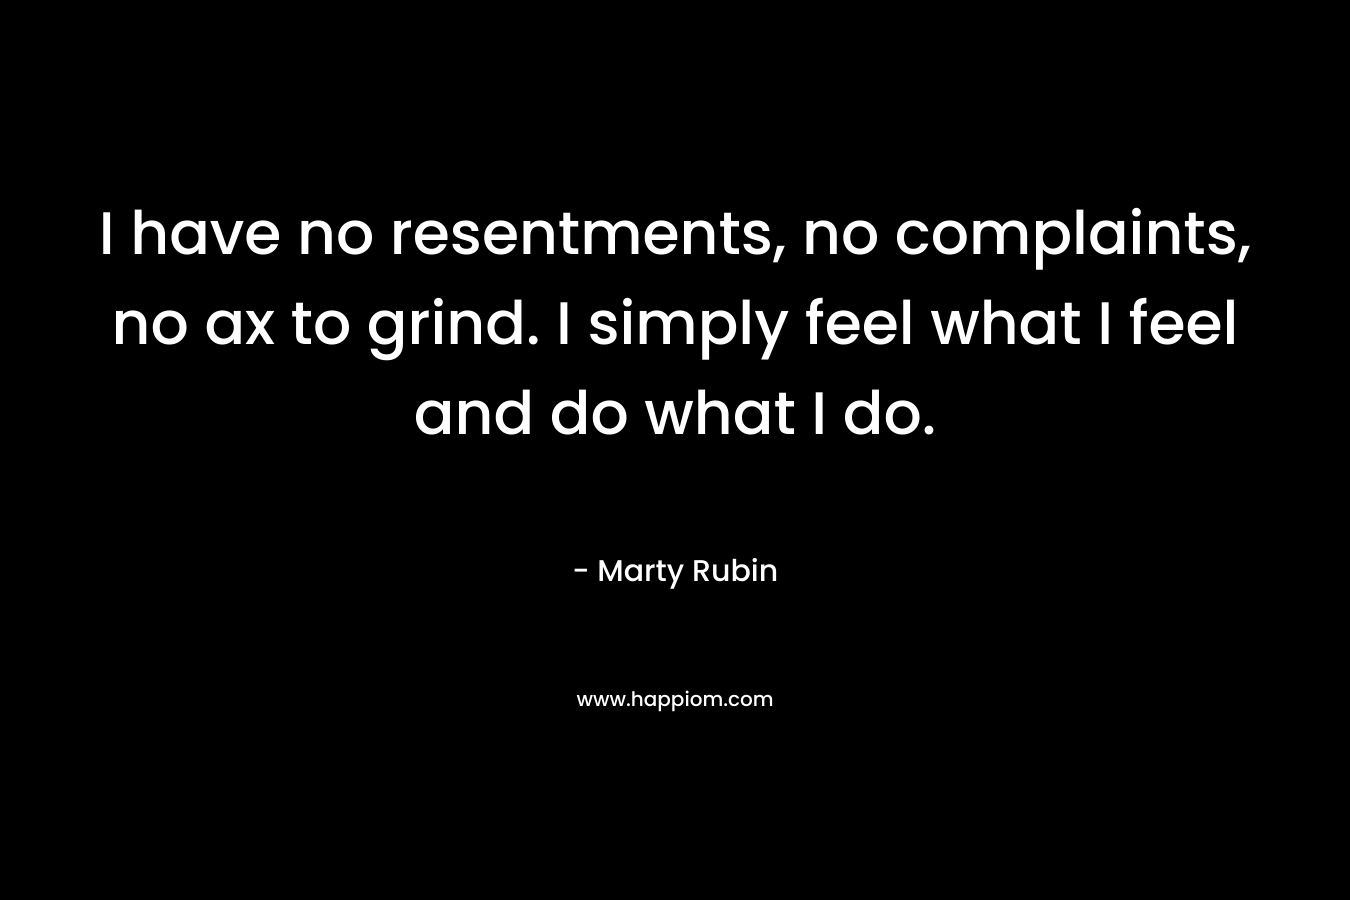 I have no resentments, no complaints, no ax to grind. I simply feel what I feel and do what I do. – Marty Rubin